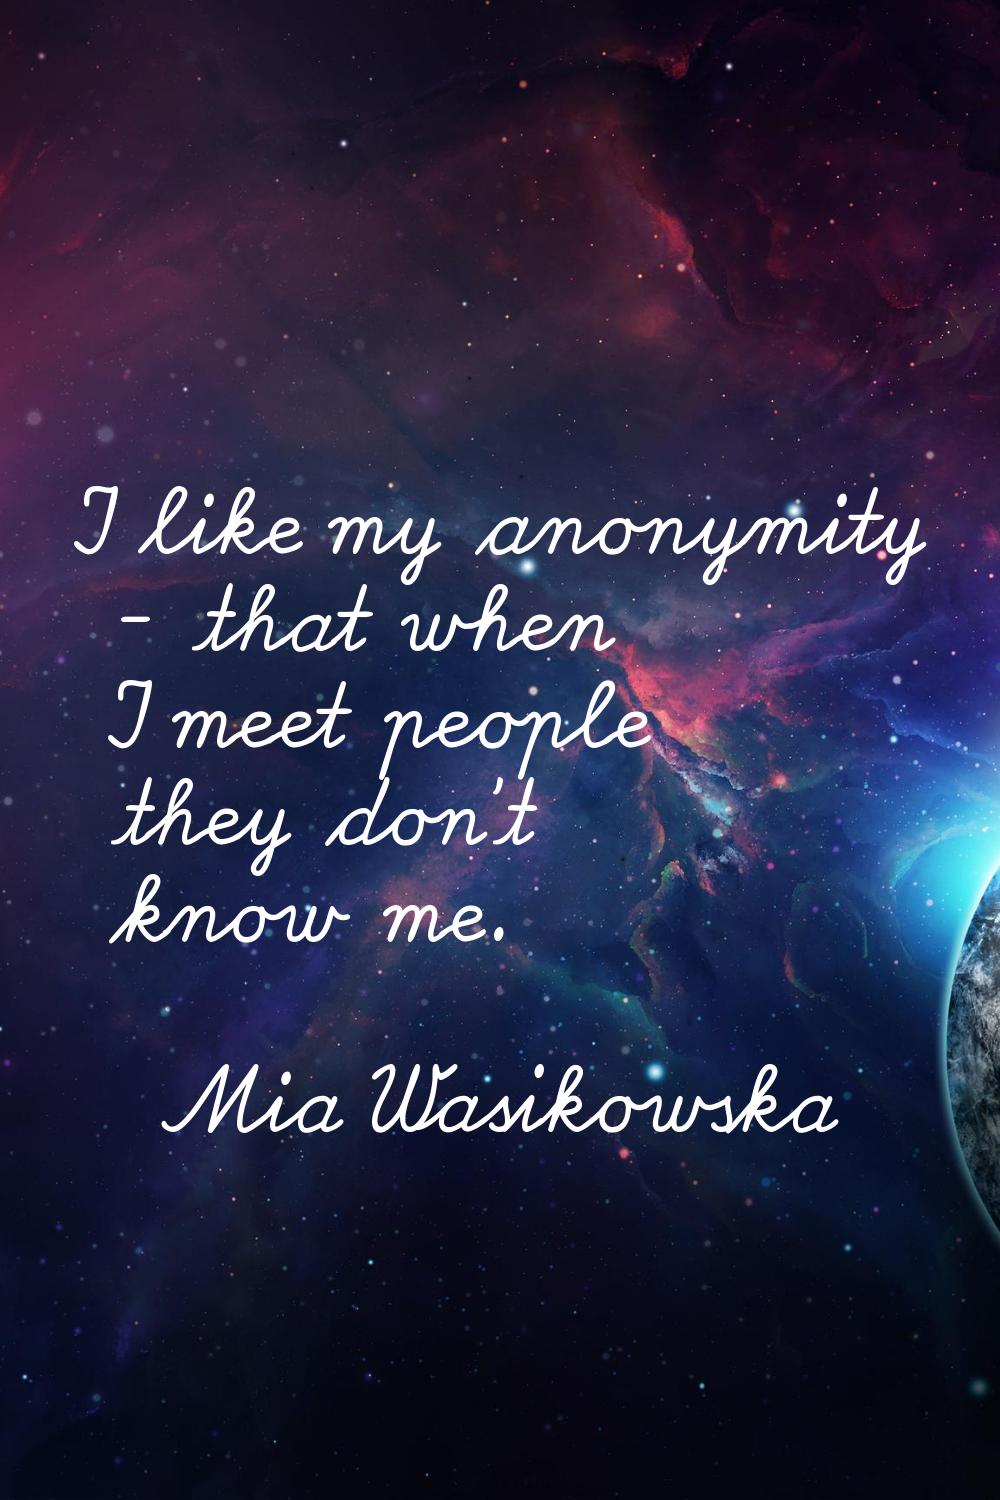 I like my anonymity - that when I meet people they don't know me.